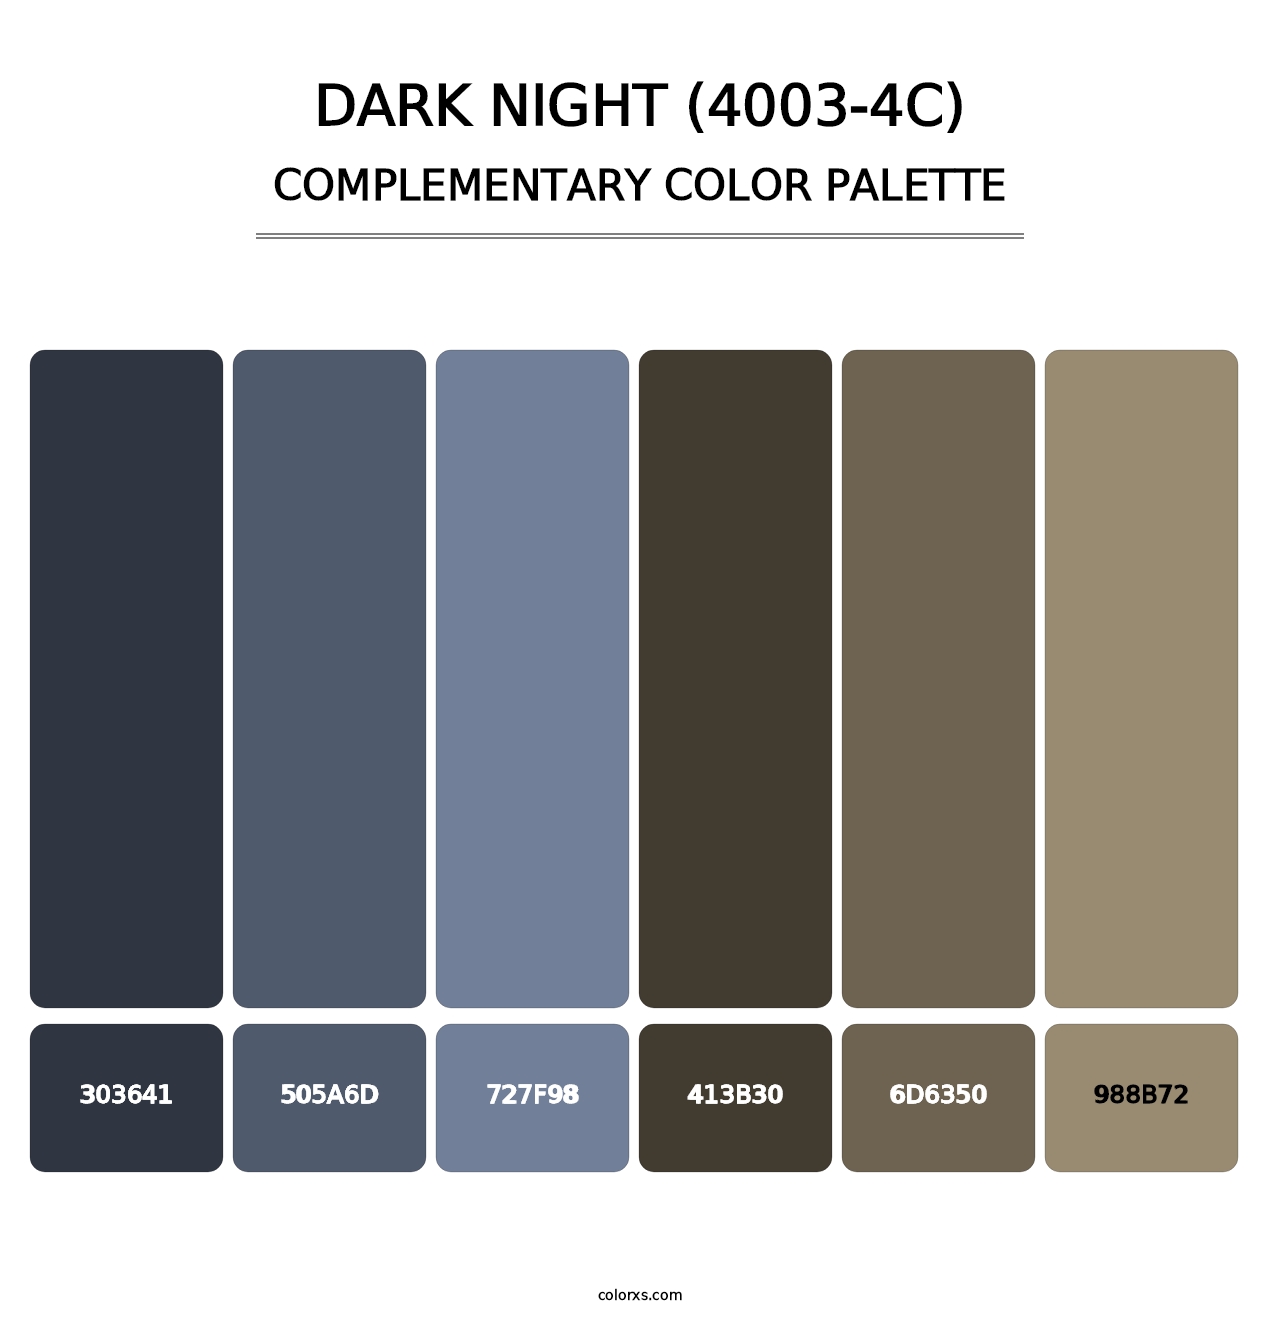 Dark Night (4003-4C) - Complementary Color Palette